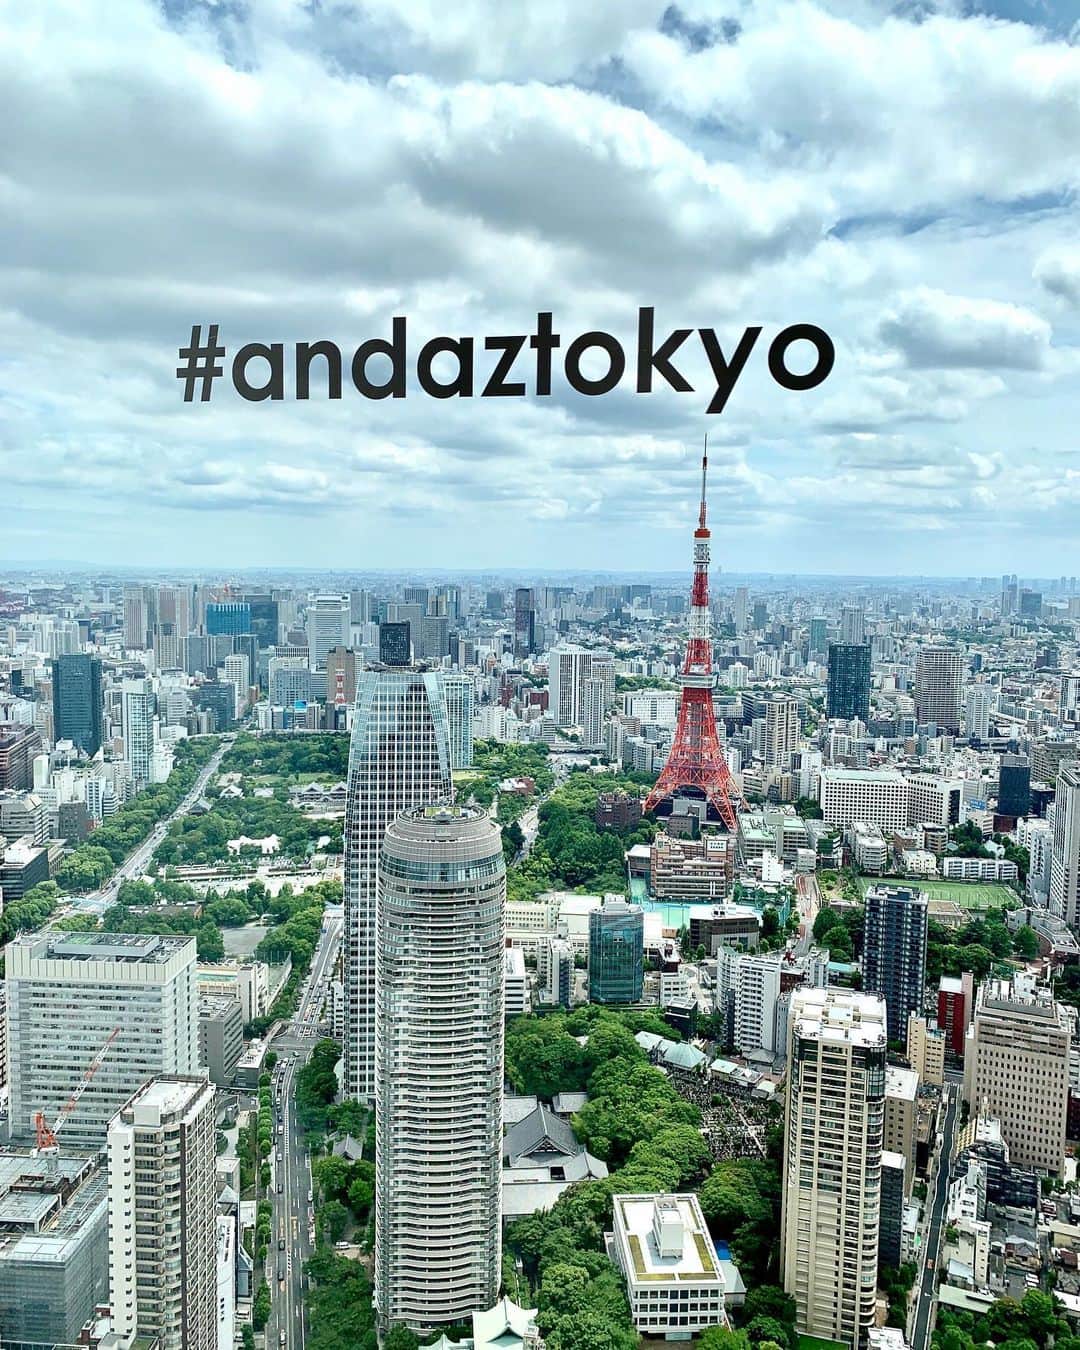 Andaz Tokyo アンダーズ 東京さんのインスタグラム写真 - (Andaz Tokyo アンダーズ 東京Instagram)「Andaz Tokyo turns 5 years old today!🎉 As Tokyo’s first luxury lifestyle hotel, we are excited to celebrate our 5th year in historic Toranomon tonight. Thank you to all our guests, teammates and neighbors for being a part of the Andaz Tokyo journey thus far. Follow along @andaztokyo to see more of tonight’s festivities, as well as unique 5th year promotions and giveaways starting from today! 🌟 2014年6月11日、日本初のラグジュアリー ライフスタイルホテルとして虎ノ門の地に開業したアンダーズ 東京。  皆様に支えられ5周年を迎えることができました。皆様のご愛顧に感謝し、肩肘張らず自分らしく過ごせる場所としてこれからもお客様をお迎えしてまいります。また、日ごろのご愛顧に感謝して5周年を記念したスペシャルメニューをレストランやスパでご用意しています。 この時期だけの限定メニューをぜひチェックしてみてくださいね。 https://www.andaztokyo.jp/restaurants/jp/special/detail/11/」6月12日 0時30分 - andaztokyo